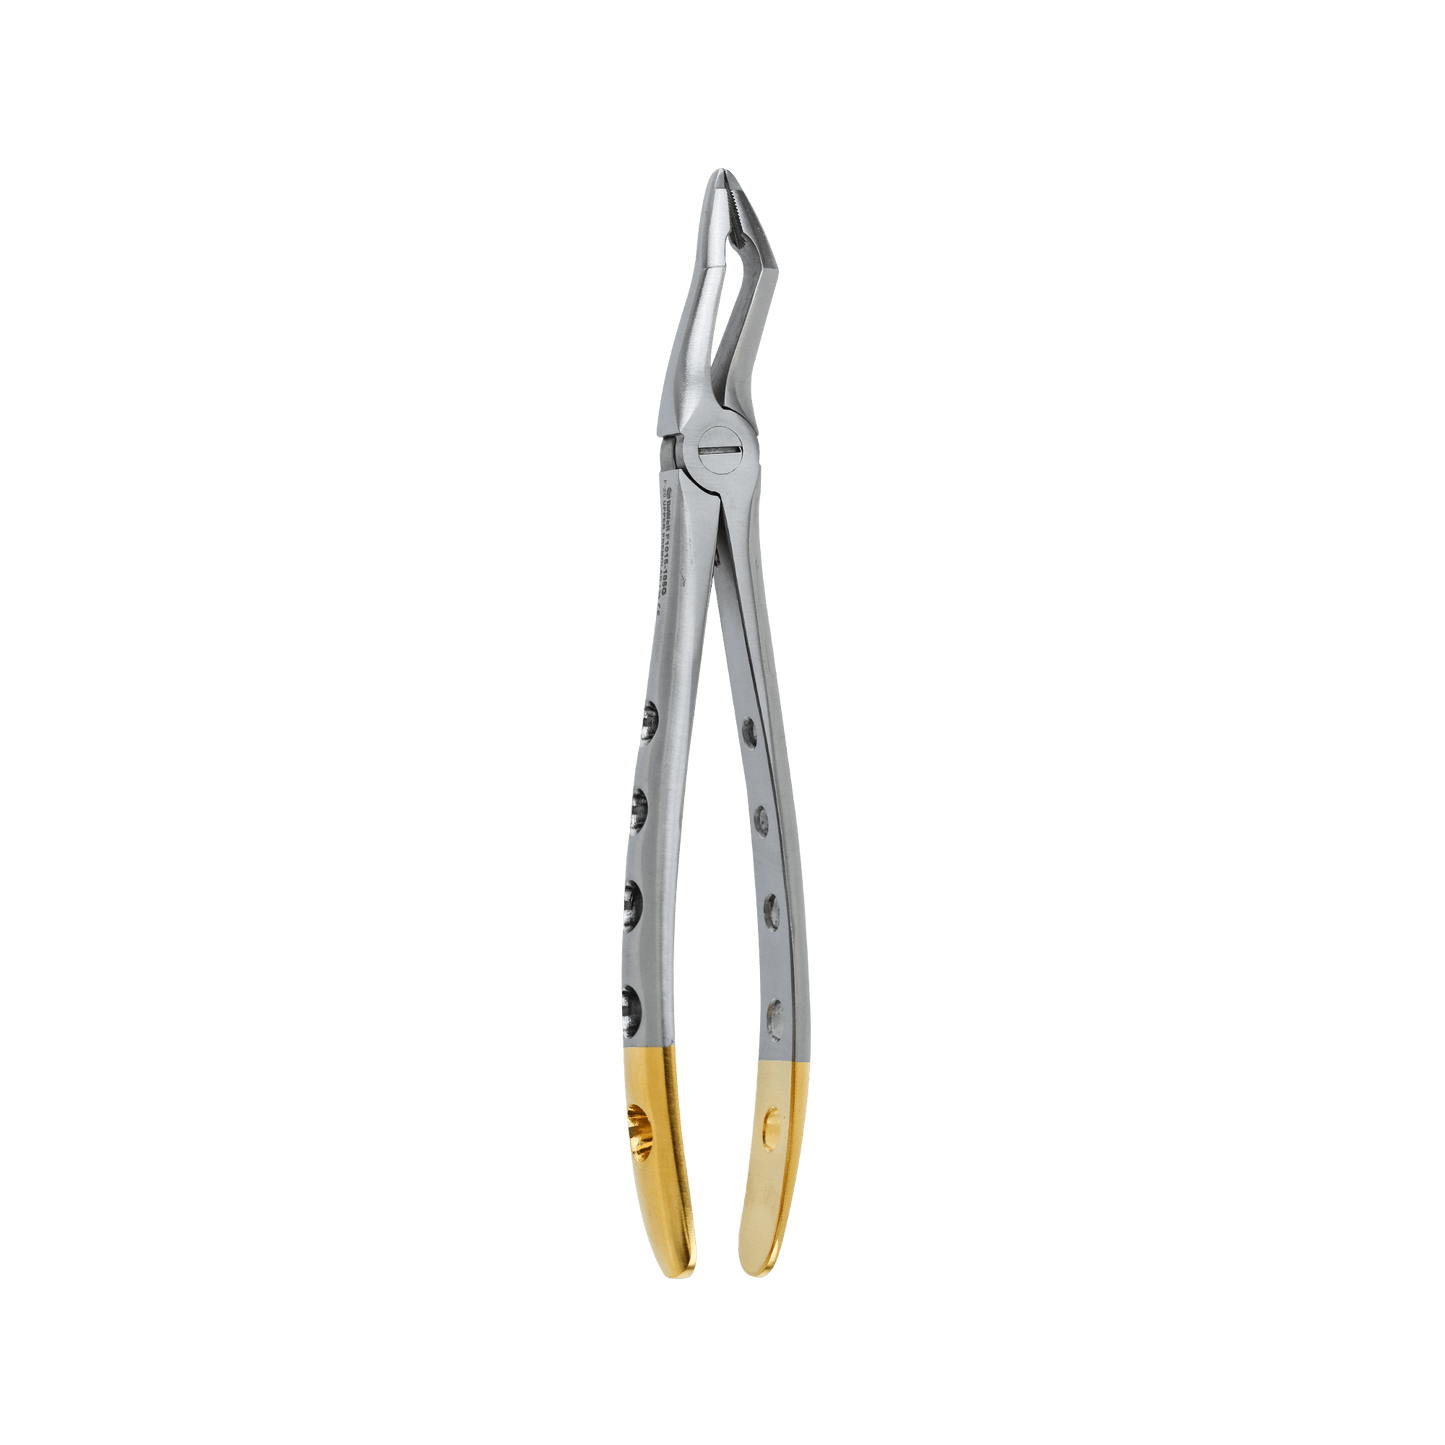 Dental Extraction Forceps F-20 Upper Premolar 1st and 2nd Molars, Apical Retention Forceps